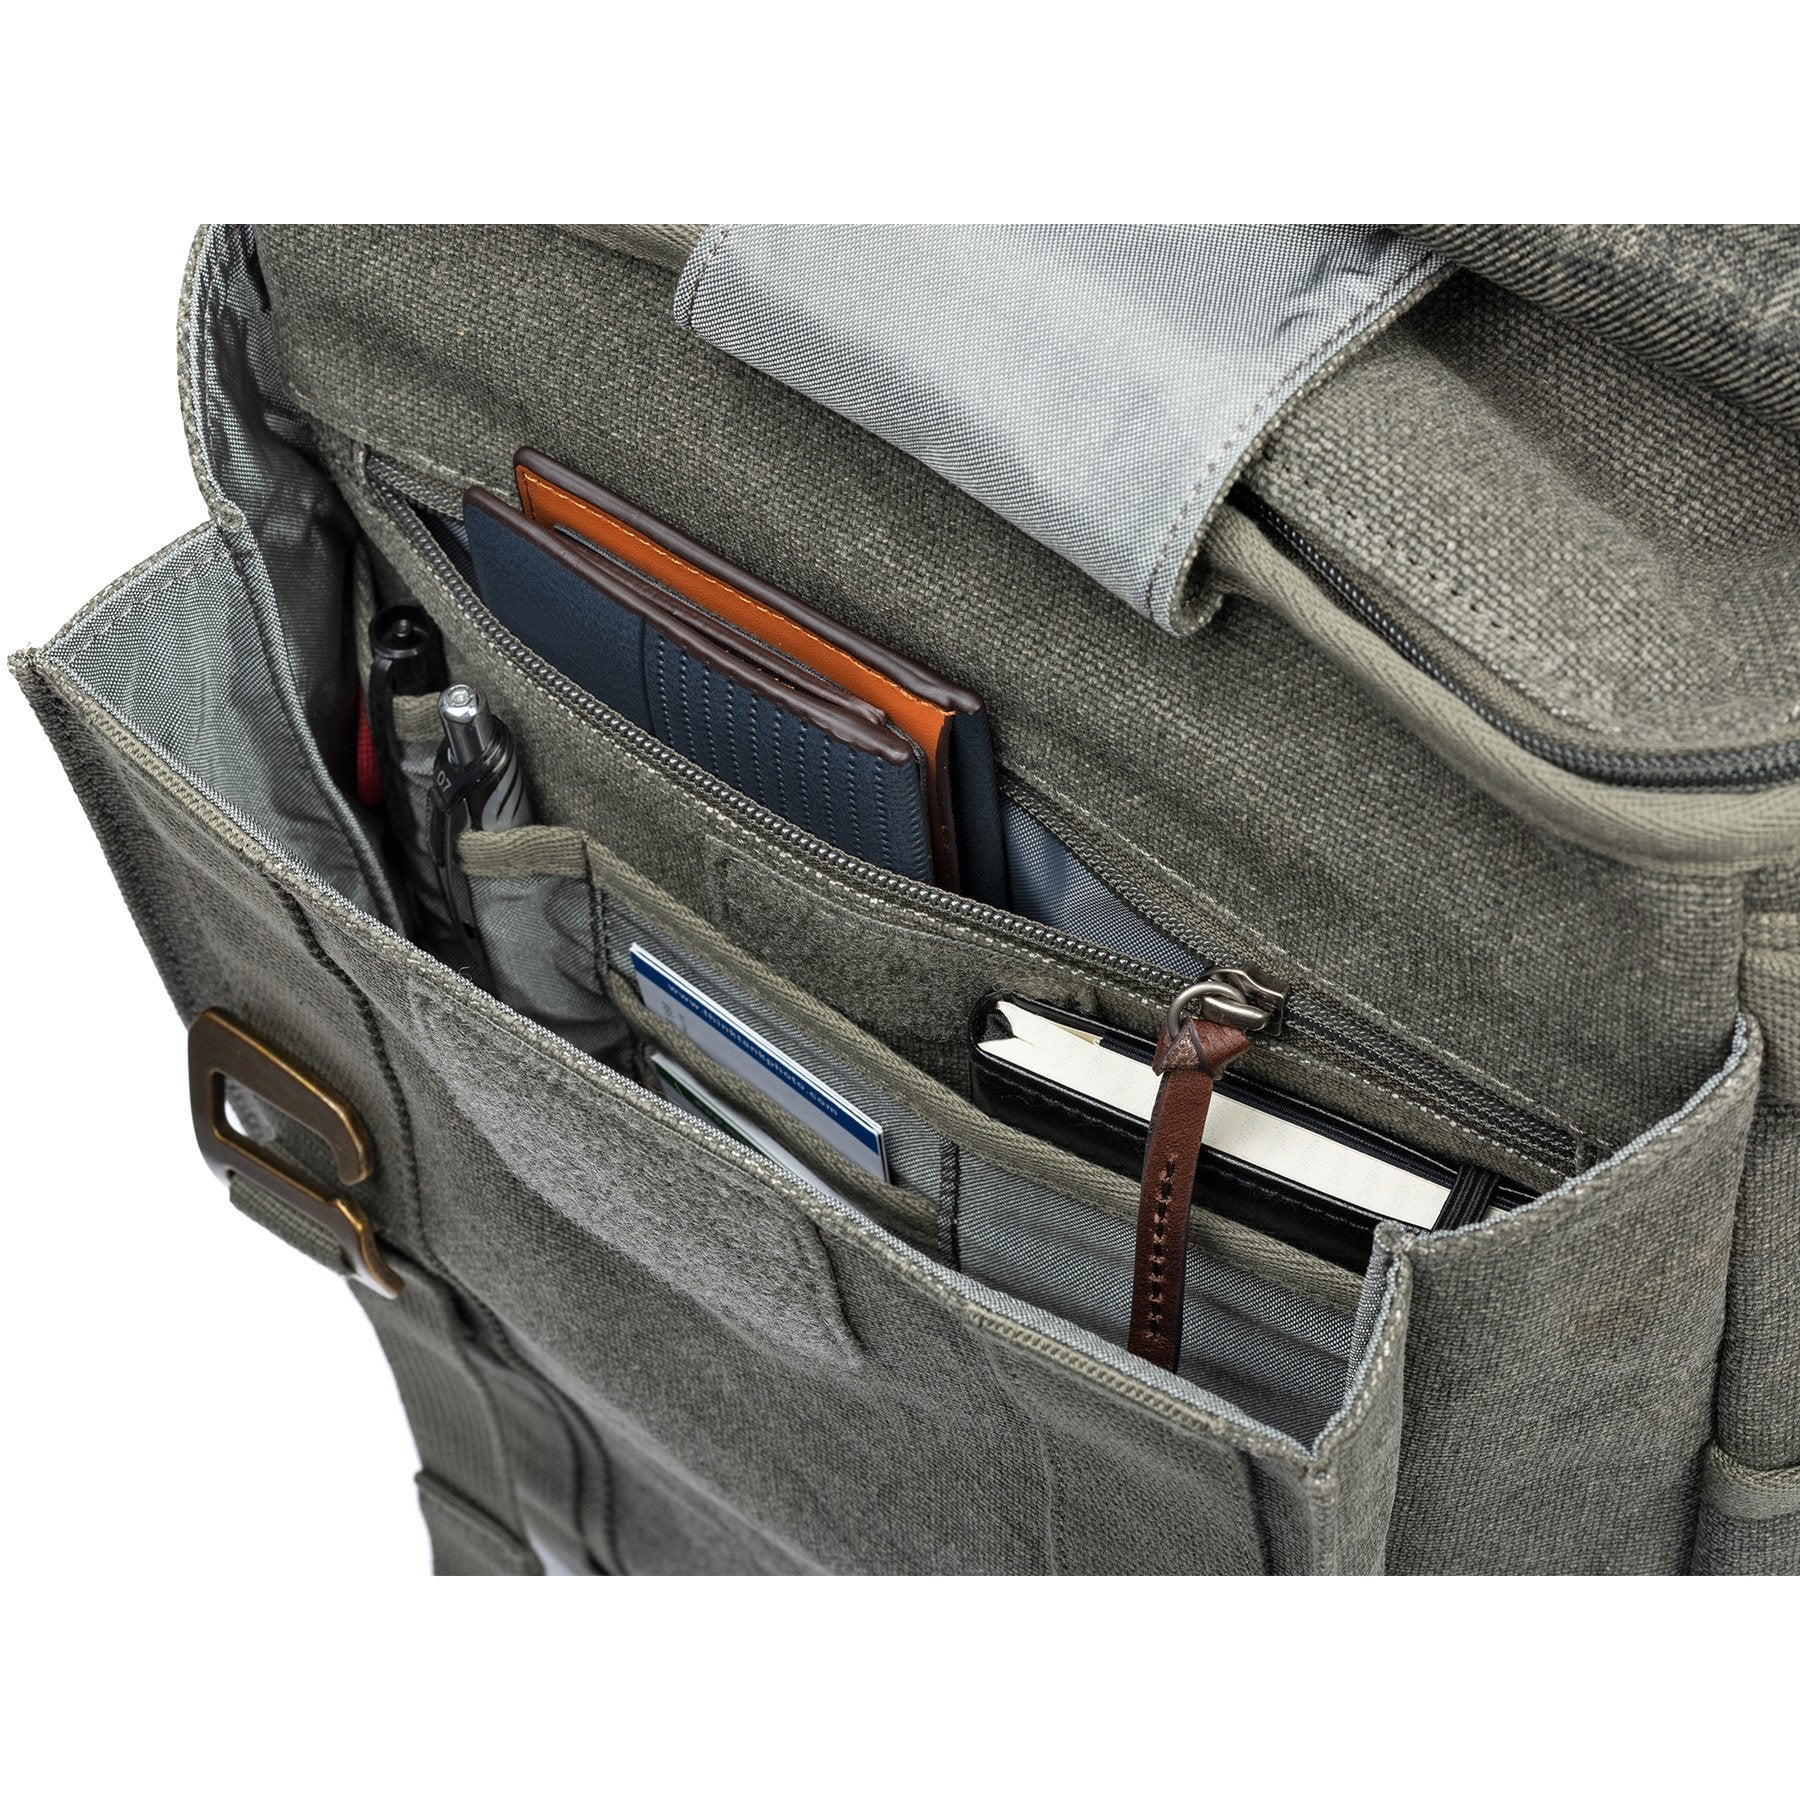 Organizer pocket with zippered pocket for valuables and small items